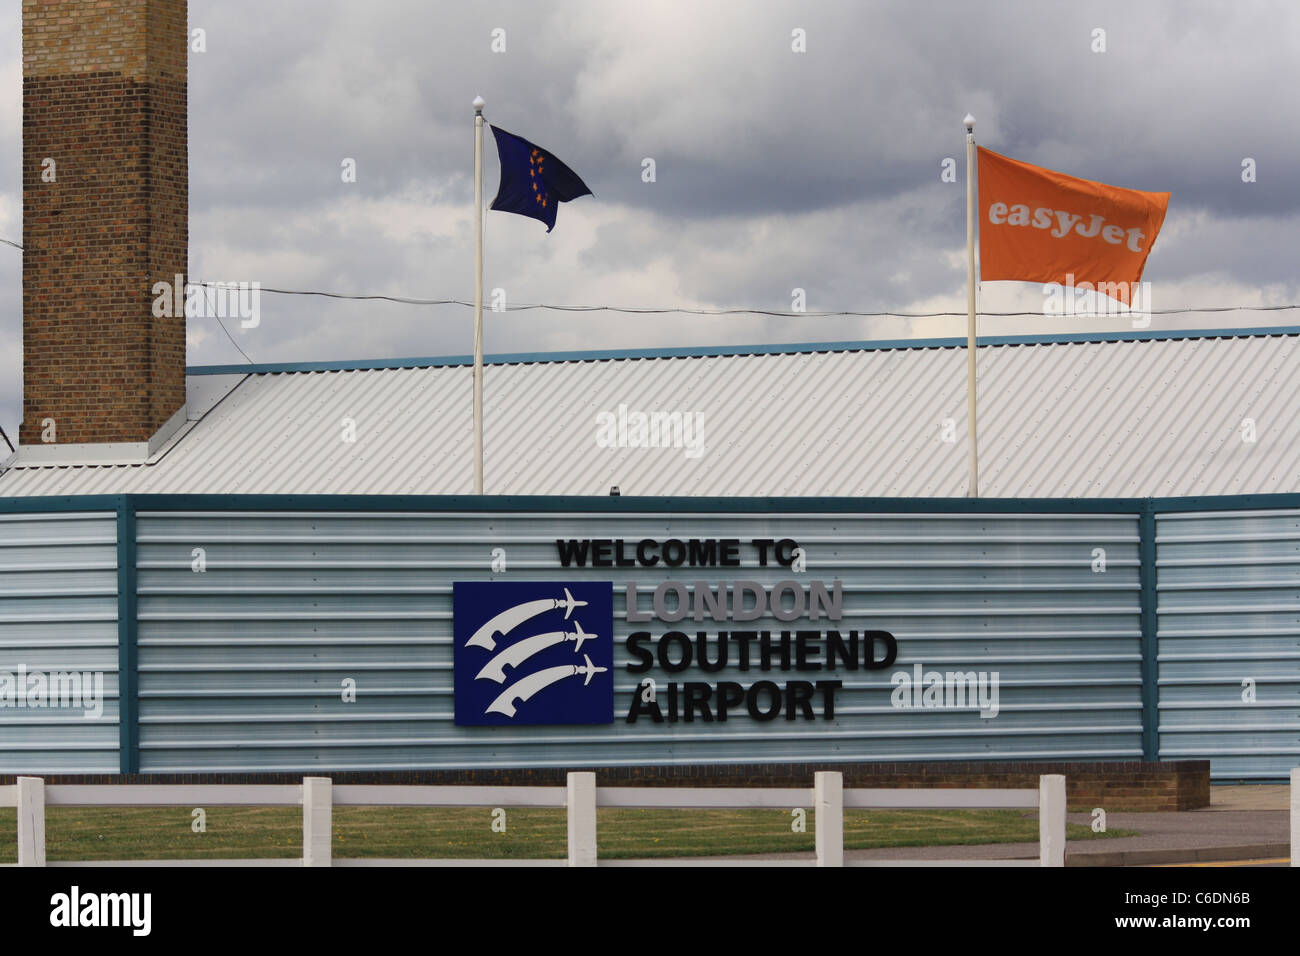 Easyjet flag flying over the southend airport sign. Stock Photo